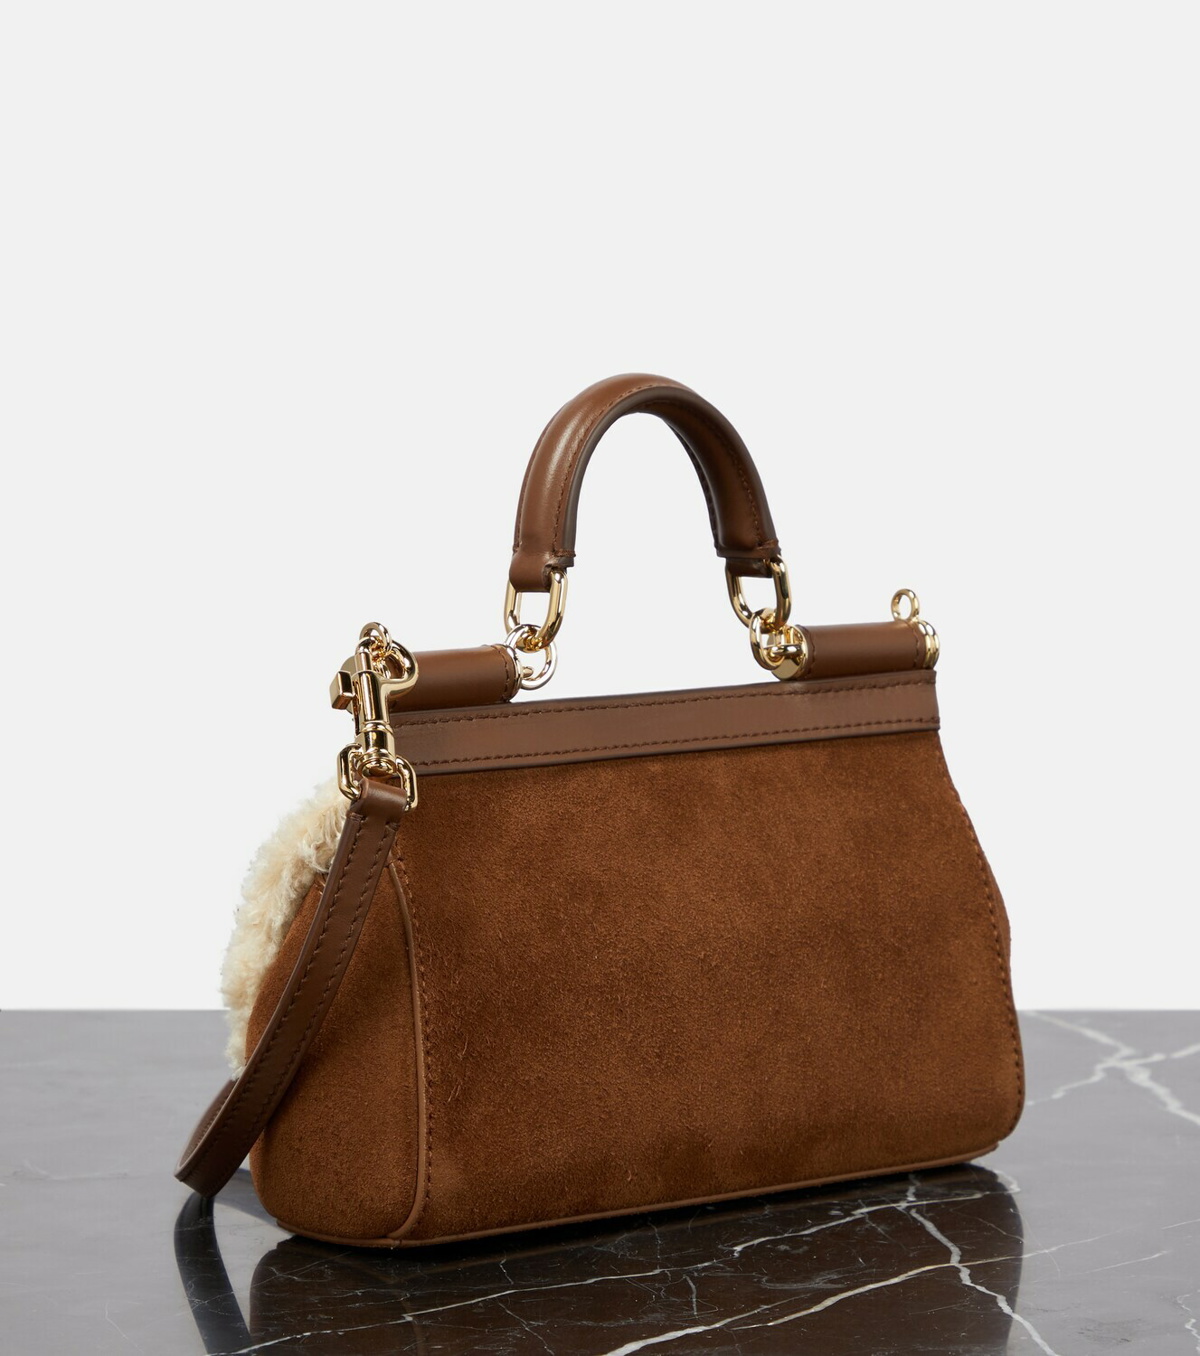 Sicily Large Suede Tote Bag in Brown - Dolce Gabbana